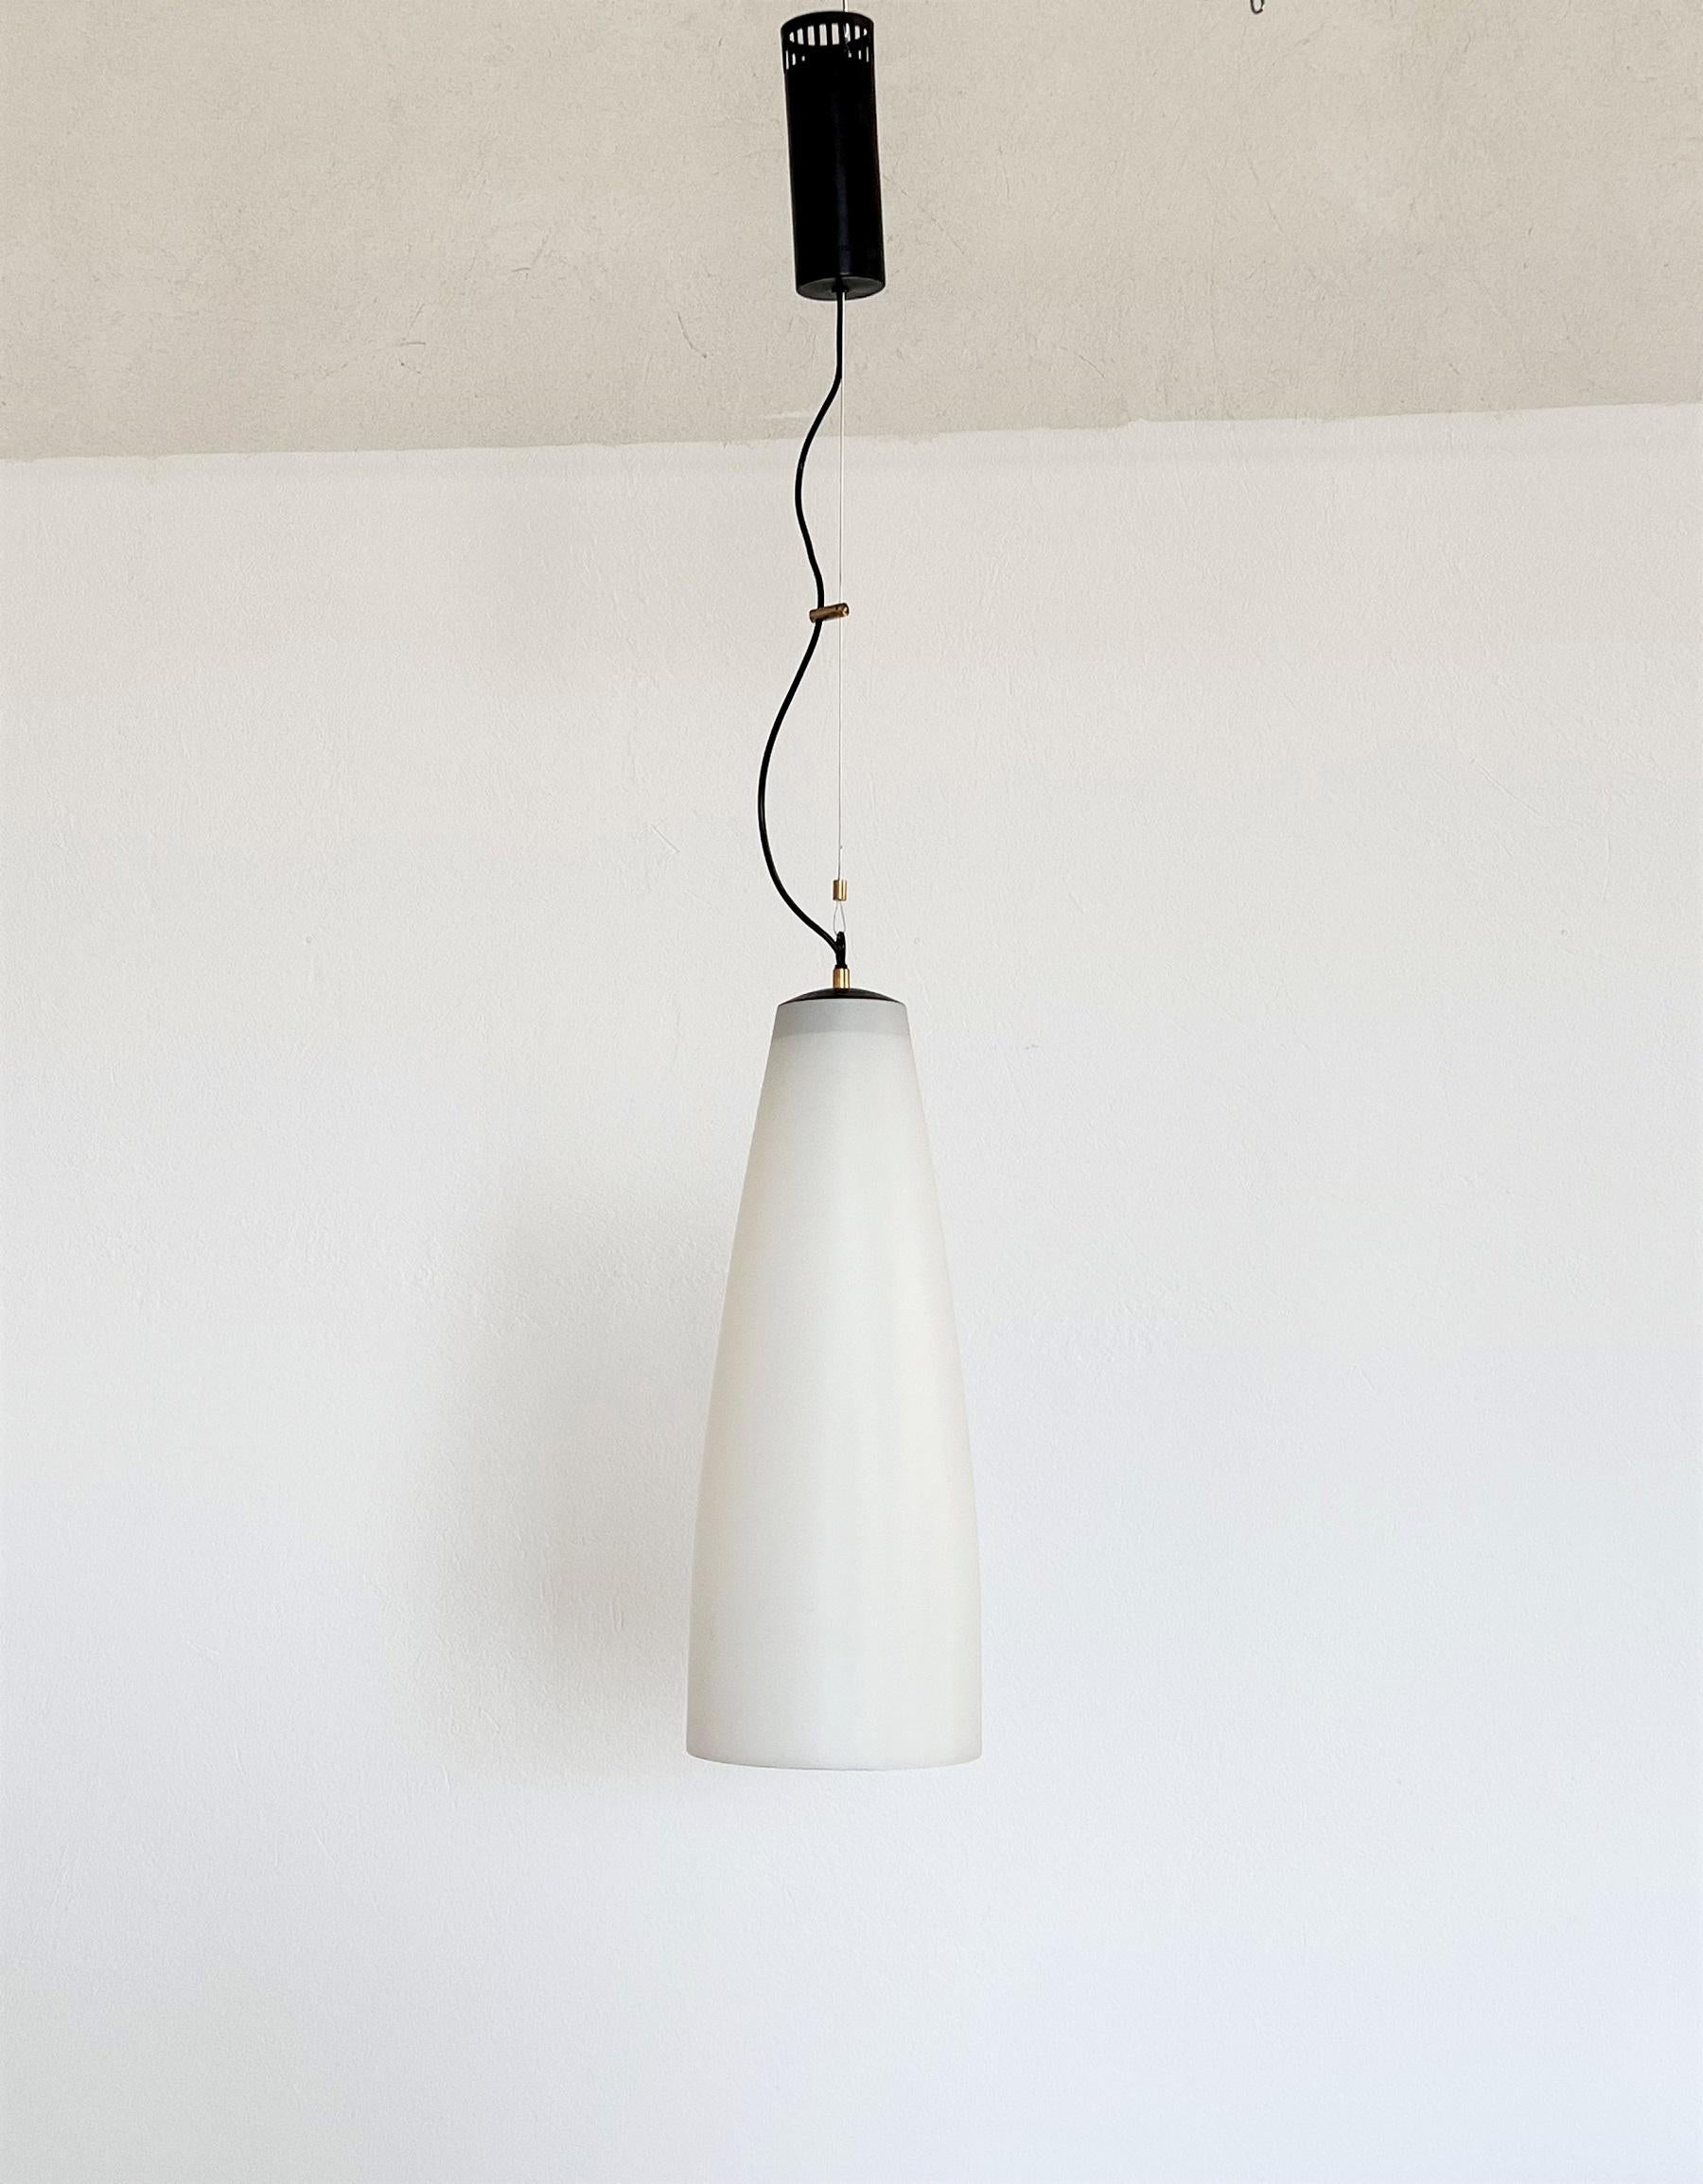 Late 20th Century Italian Midcentury Extra Long Pendant Light in Milky White Glass, 1970s For Sale